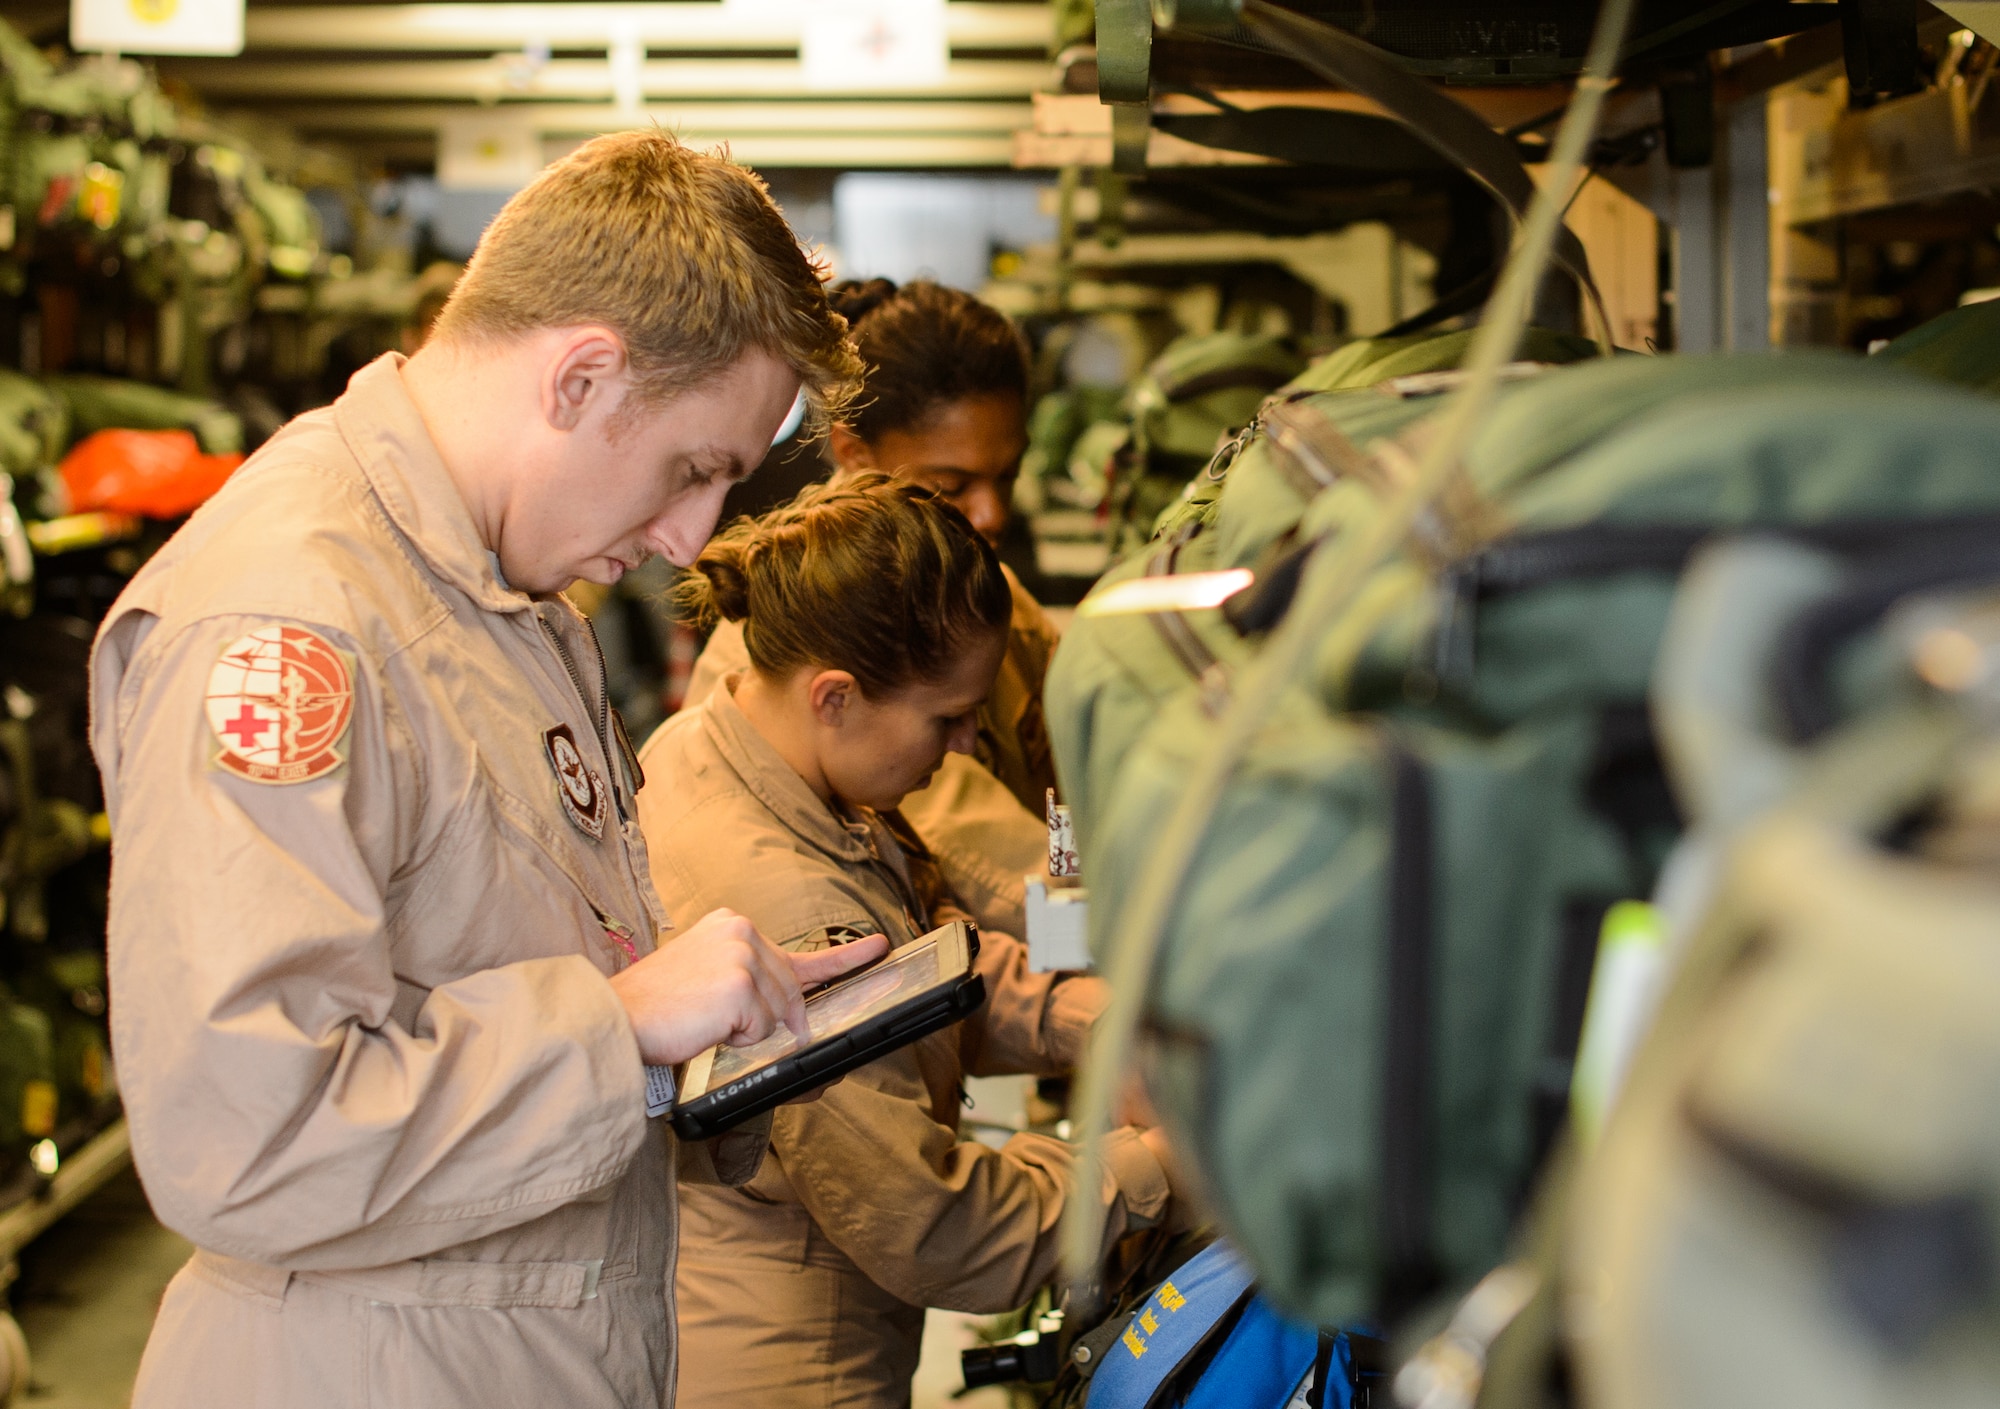 Senior Airmen Ryan Rieth, left, Beverly Spencer, center, and Master Sgt. Natalia Stockhausen, all 10th Expeditionary Aeromedical Evacuation Flight technicians, inventory medical equipment Nov. 10, 2015, at Ramstein Air Base, Germany. The three technicians helped treat and care for patients midair as they are returned from deployed locations for higher level medical treatment. (U.S. Air Force photo/Staff Sgt. Armando A. Schwier-Morales)